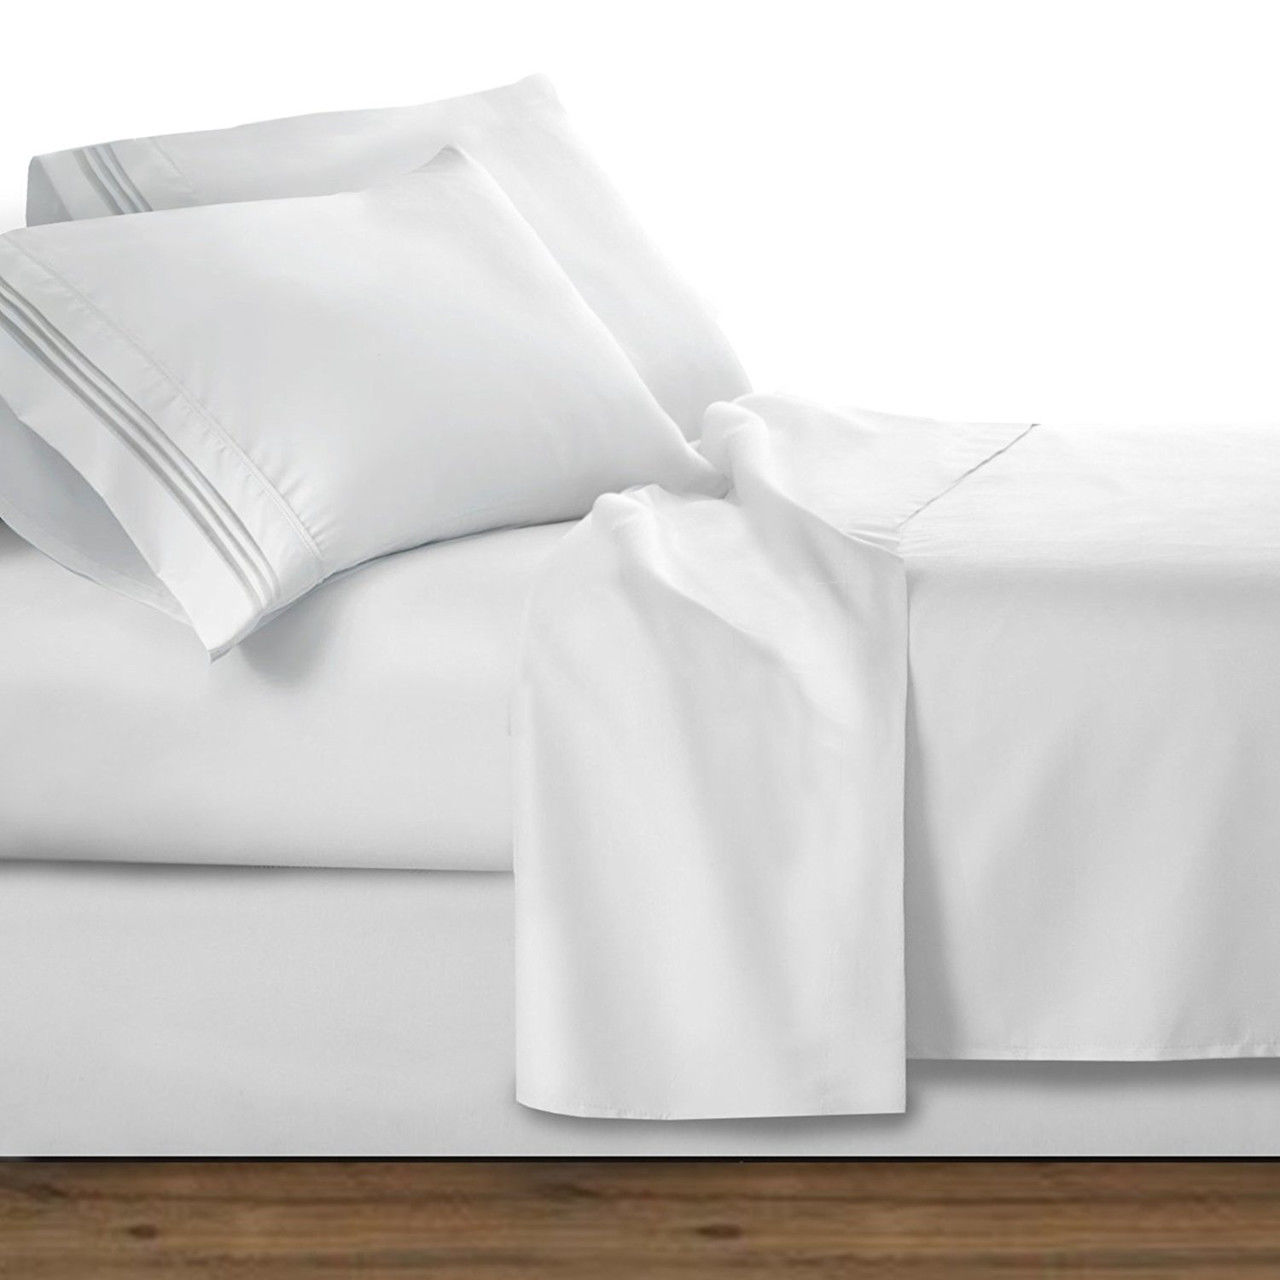 What color options does the Clara Clark sheet set offer?